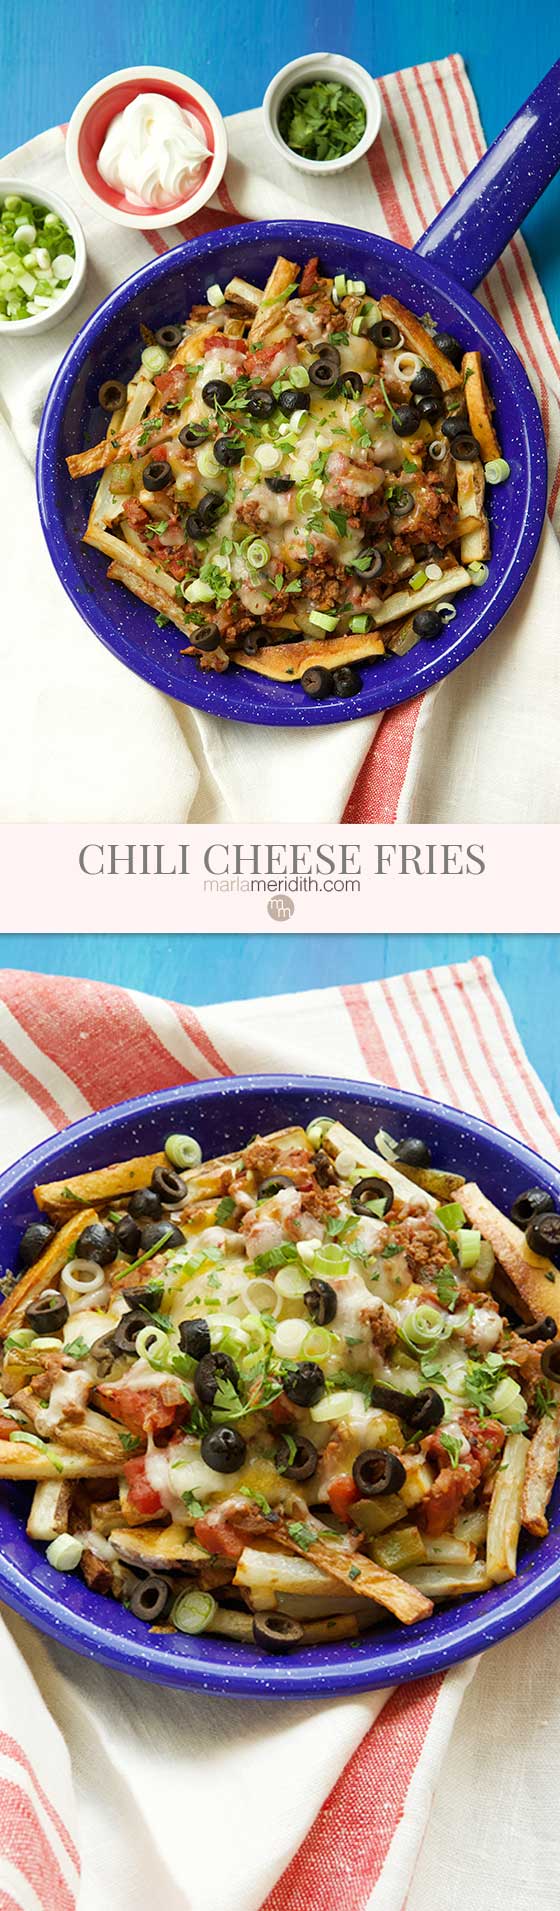 Chili Cheese Baked Fries: this recipe is lightened up and absolutely delicious! MarlaMeridith.com